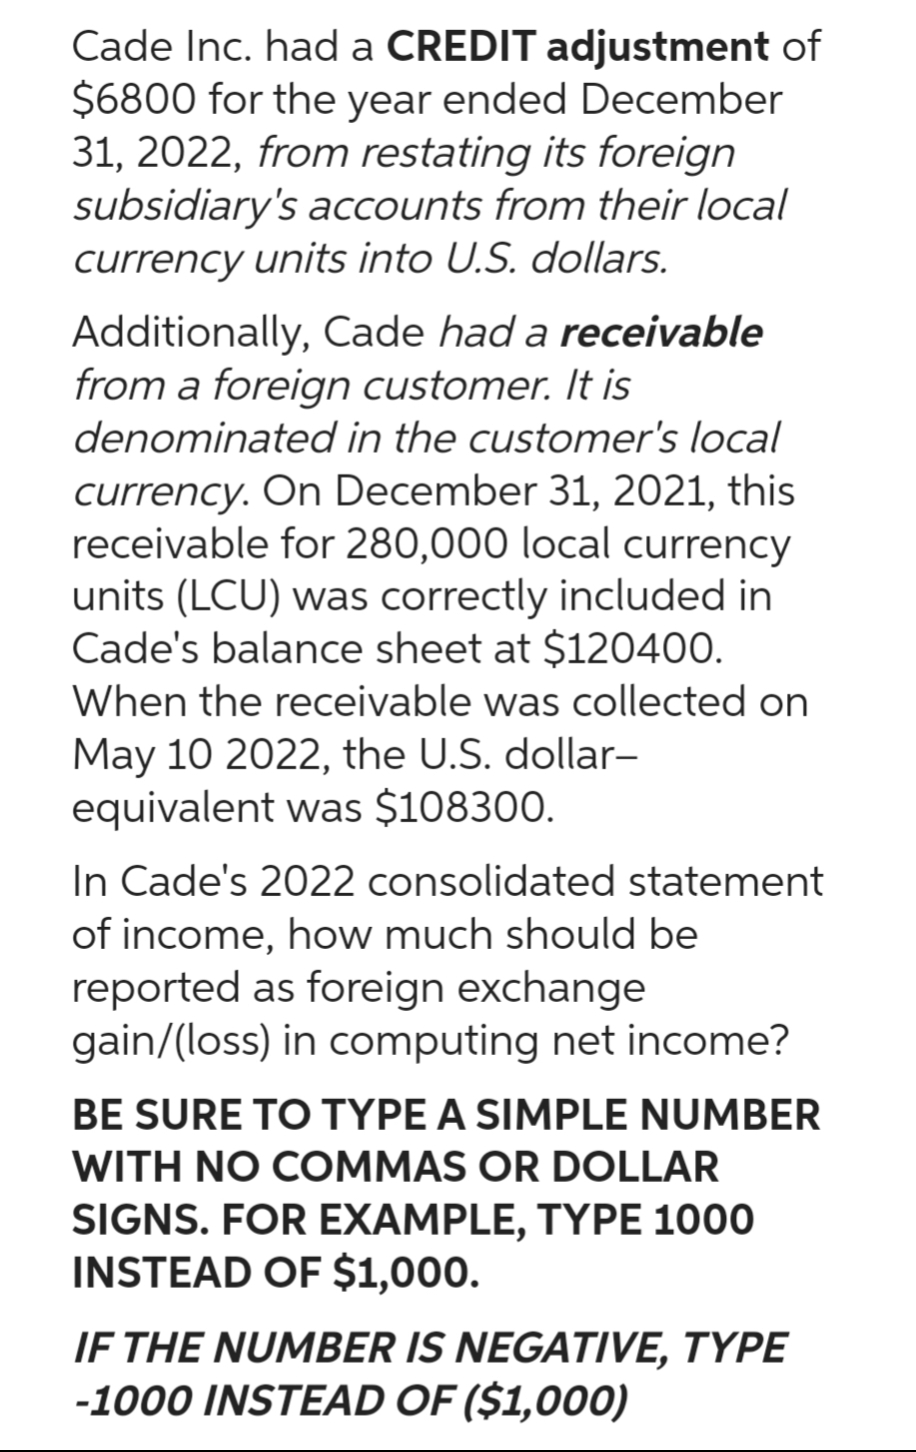 Cade Inc. had a CREDIT adjustment of
$6800 for the year ended December
31, 2022, from restating its foreign
subsidiary's accounts from their local
currency units into U.S. dollars.
Additionally, Cade had a receivable
from a foreign customer. It is
denominated in the customer's local
currency. On December 31, 2021, this
receivable for 280,000 local currency
units (LCU) was correctly included in
Cade's balance sheet at $120400.
When the receivable was collected on
May 10 2022, the U.S. dollar-
equivalent was $108300.
In Cade's 2022 consolidated statement
of income, how much should be
reported as foreign exchange
gain/(loss) in computing net income?
BE SURE TO TYPE A SIMPLE NUMBER
WITH NO COMMAS OR DOLLAR
SIGNS. FOR EXAMPLE, TYPE 1000
INSTEAD OF $1,000.
IF THE NUMBER IS NEGATIVE, TYPE
-1000 INSTEAD OF ($1,000)